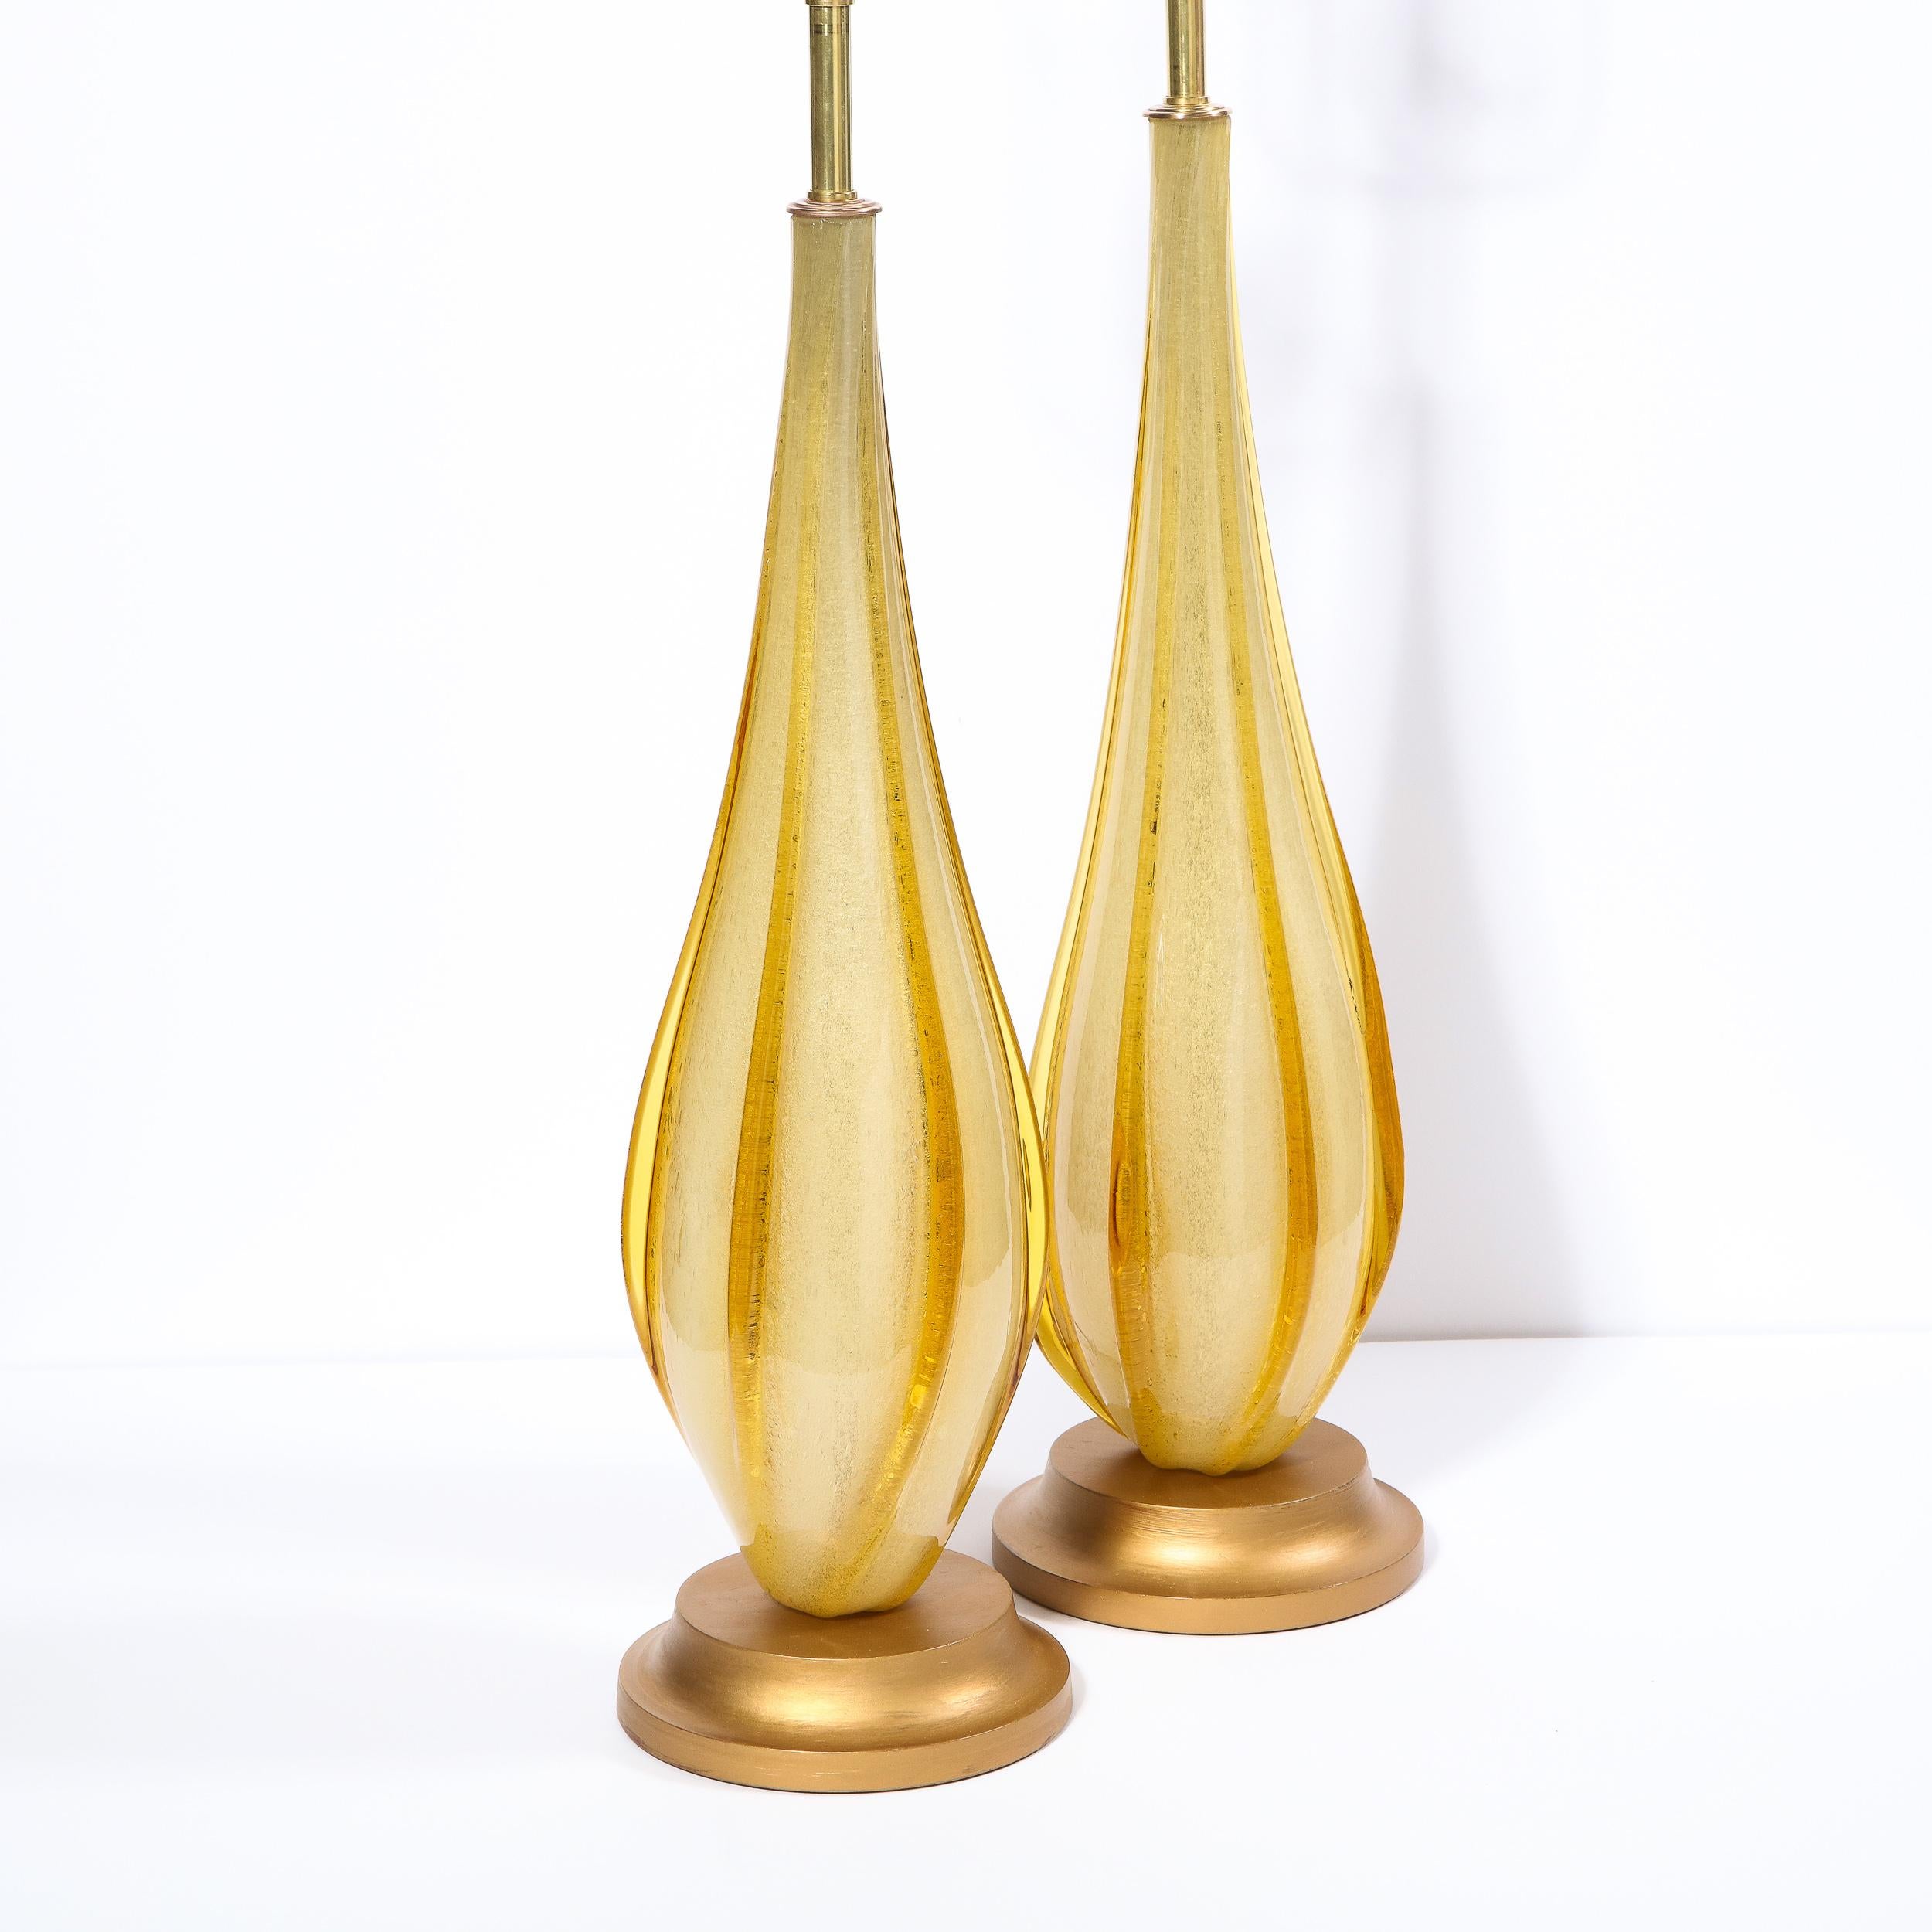 Mid-20th Century Pair of Mid-Century Modern Handblown Murano Table Lamps with Brass Fittings